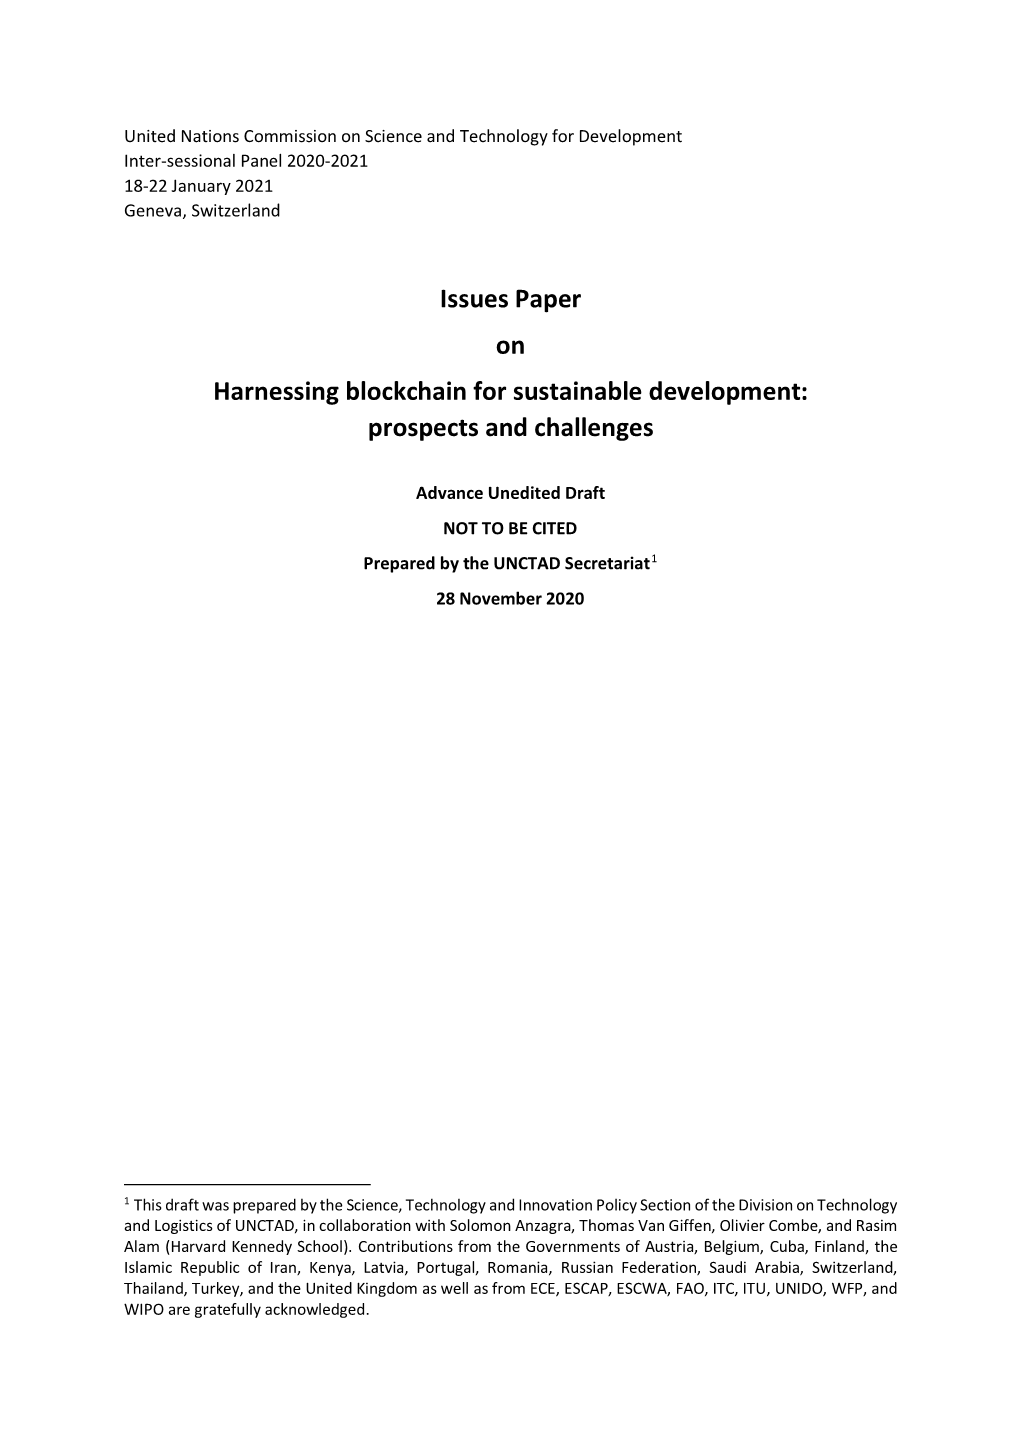 Issues Paper on Harnessing Blockchain for Sustainable Development: Prospects and Challenges